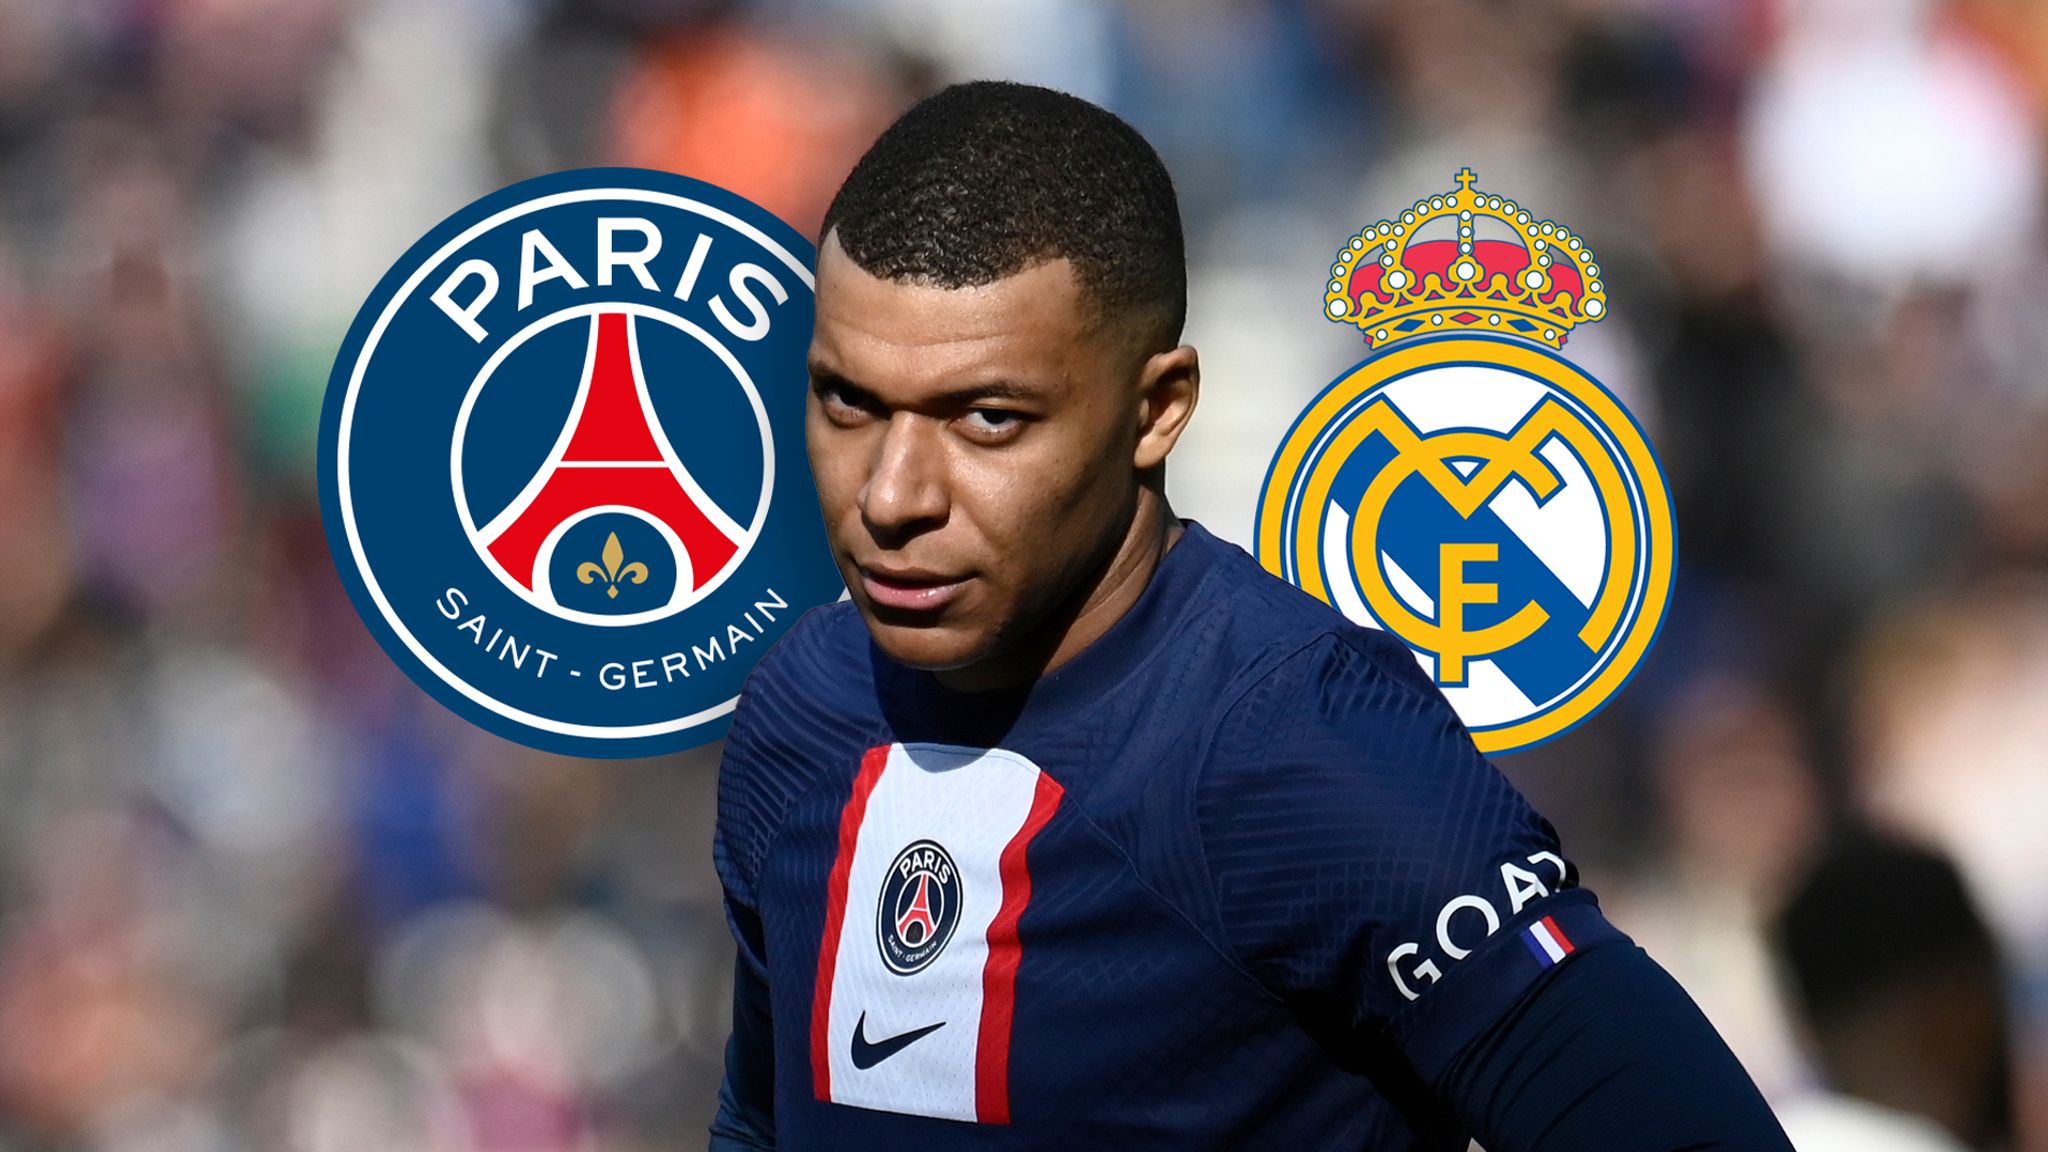 Kylian Mbappe could make sensational Premier League switch - with Real Madrid move 'definitively off': report